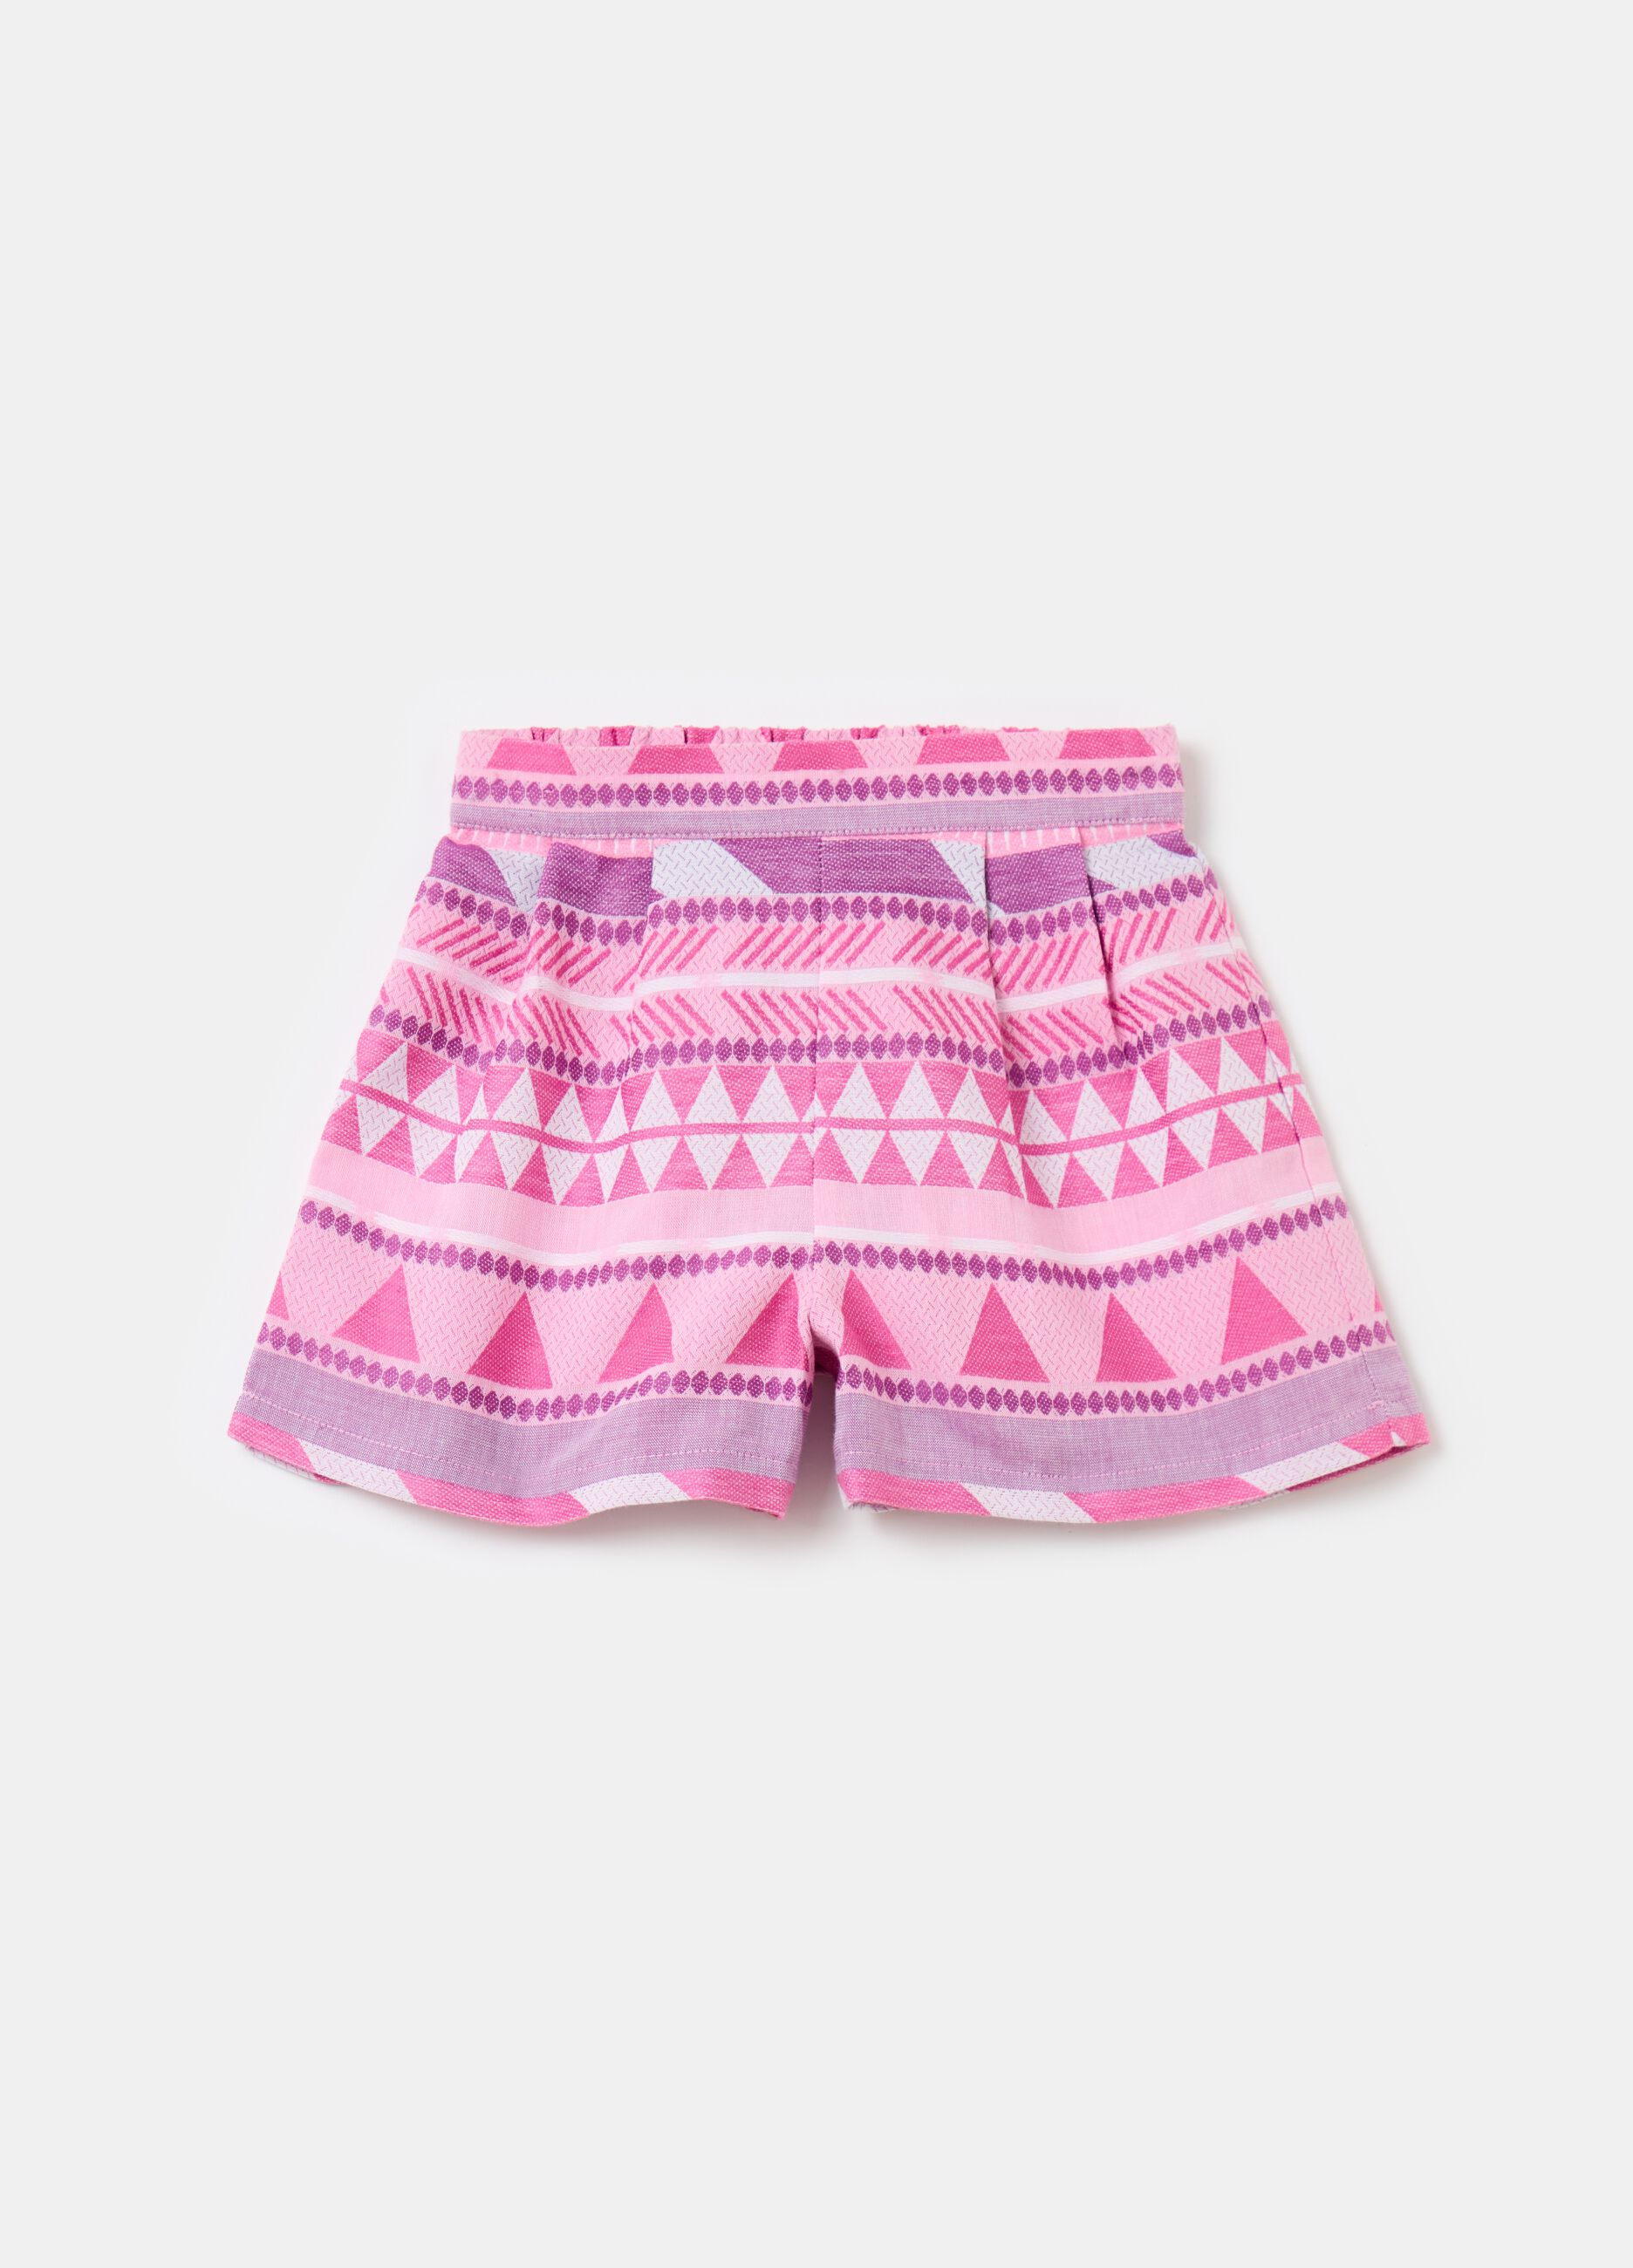 Shorts with ethnic jacquard designs